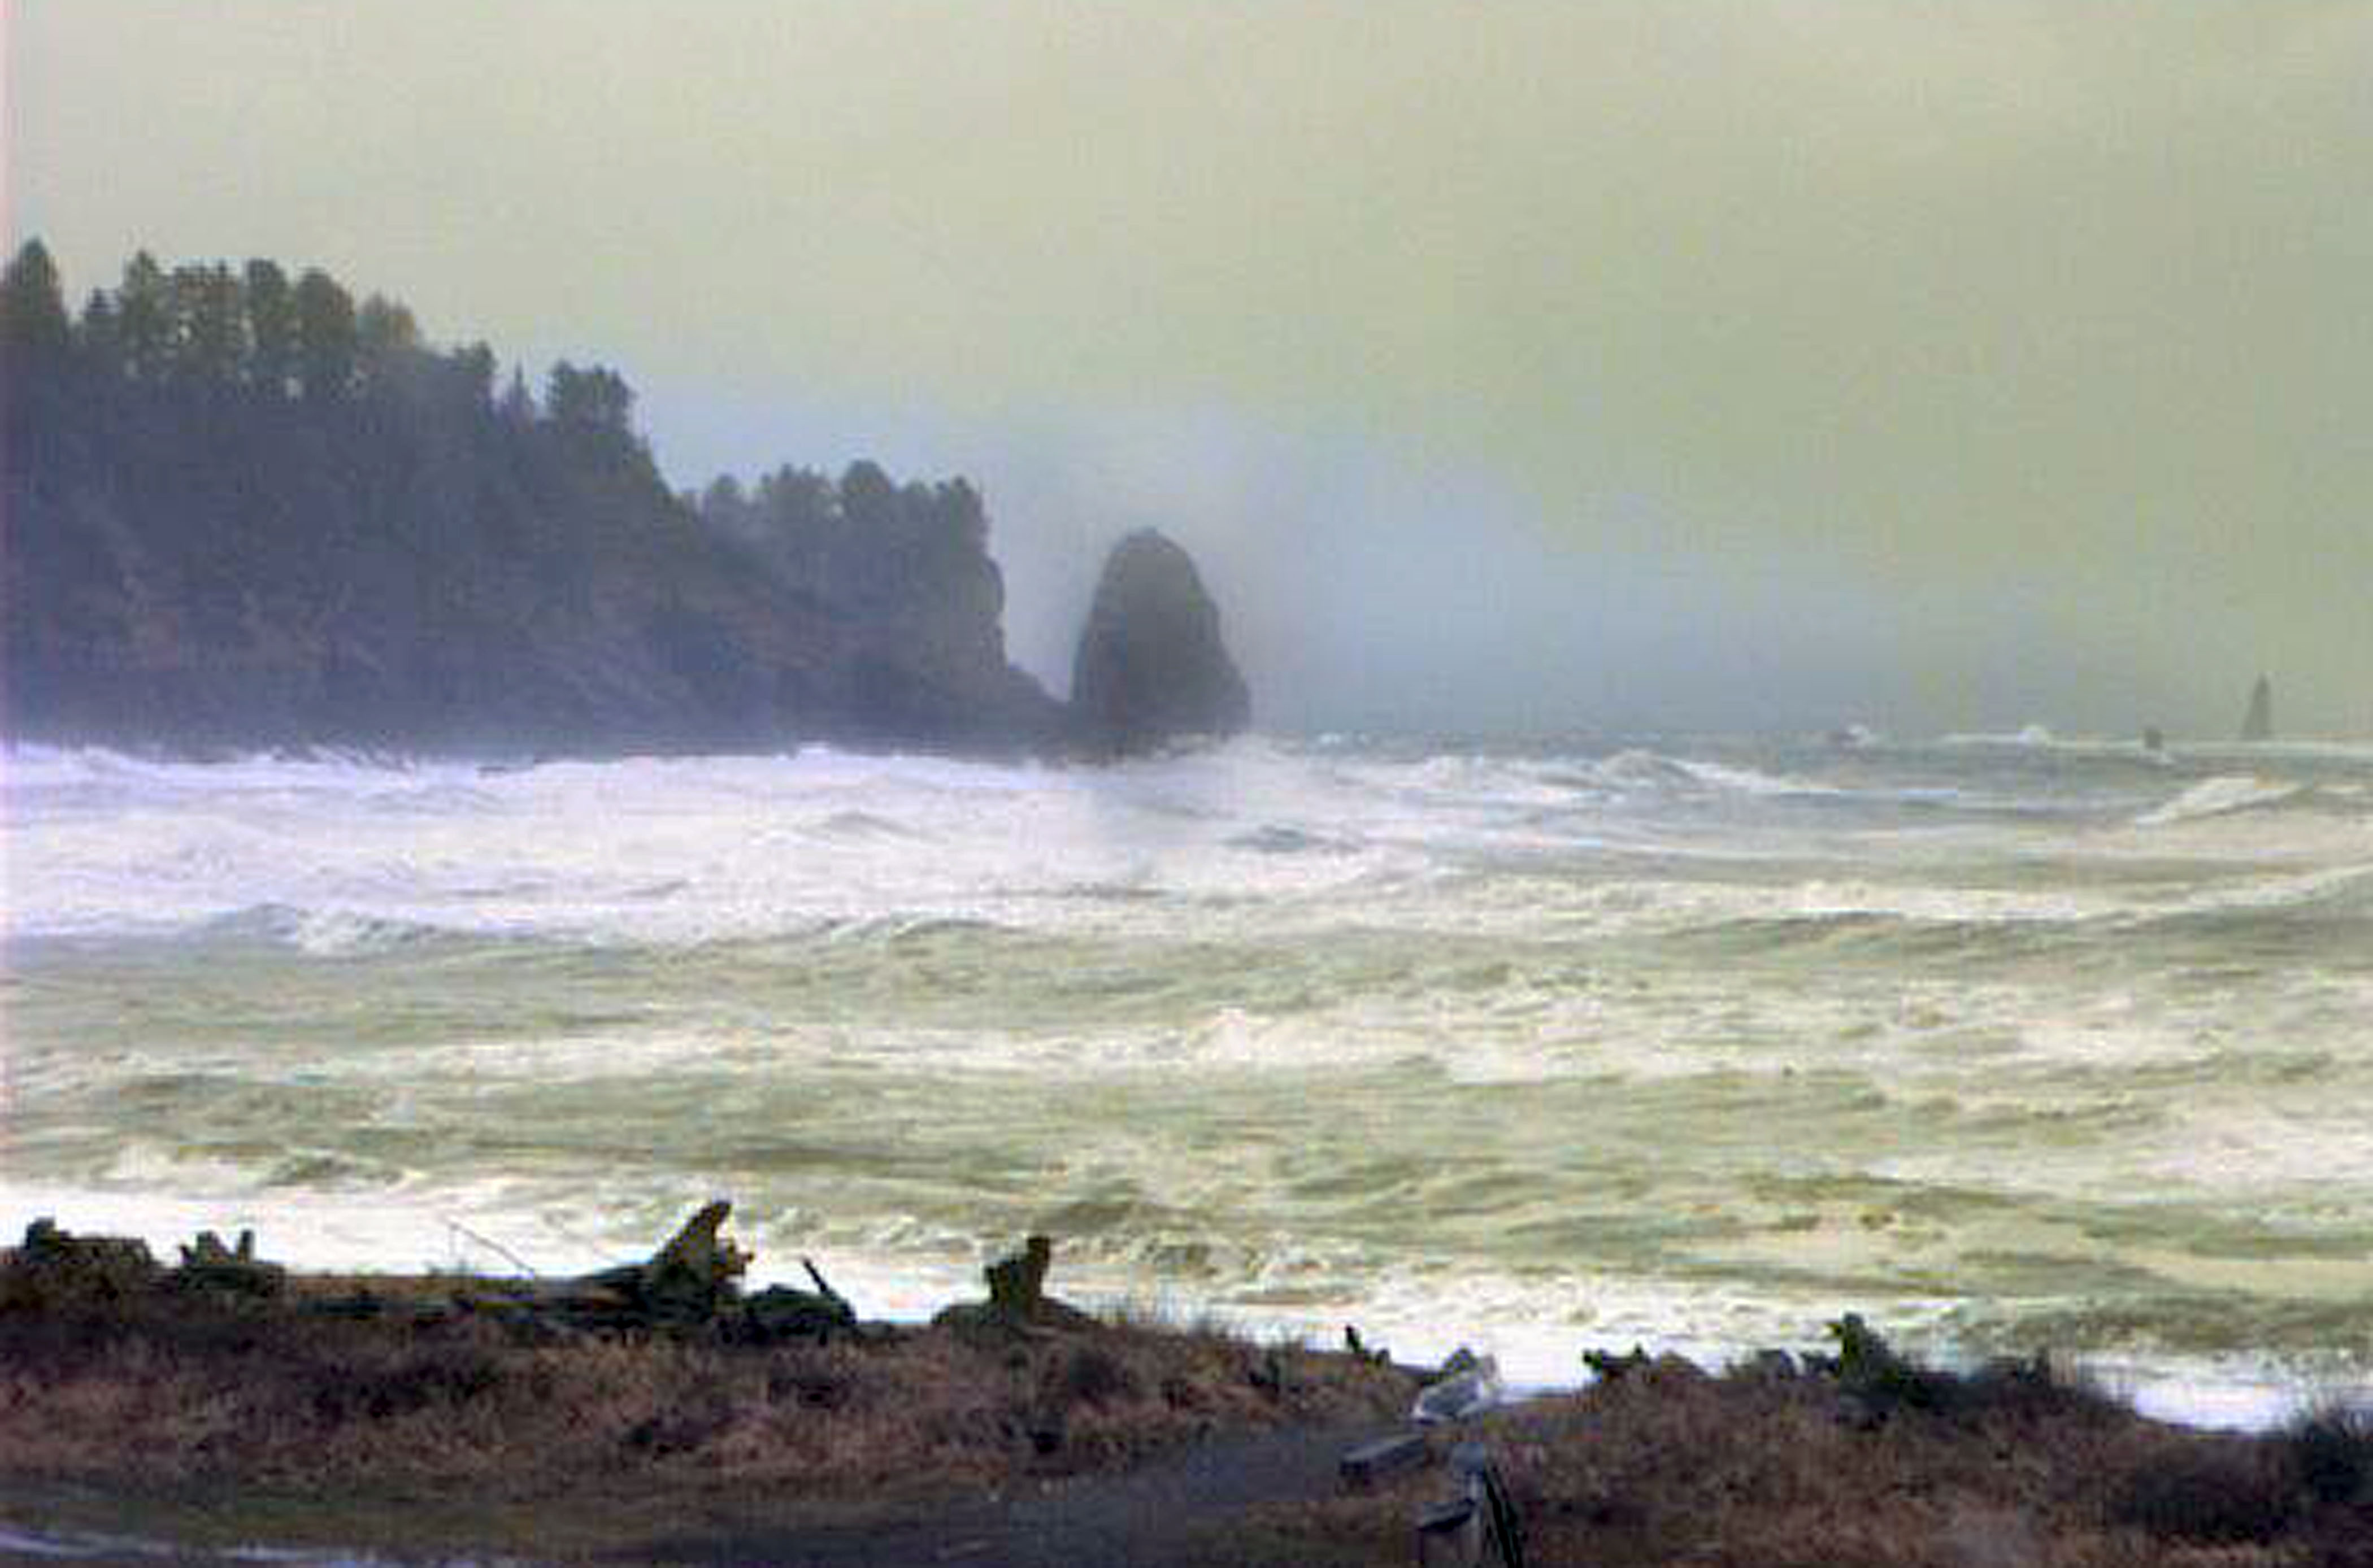 The surf churns this morning at First Beach near LaPush in this photo taken from the Forks Chamber of Commerce webcam. forkswa.com